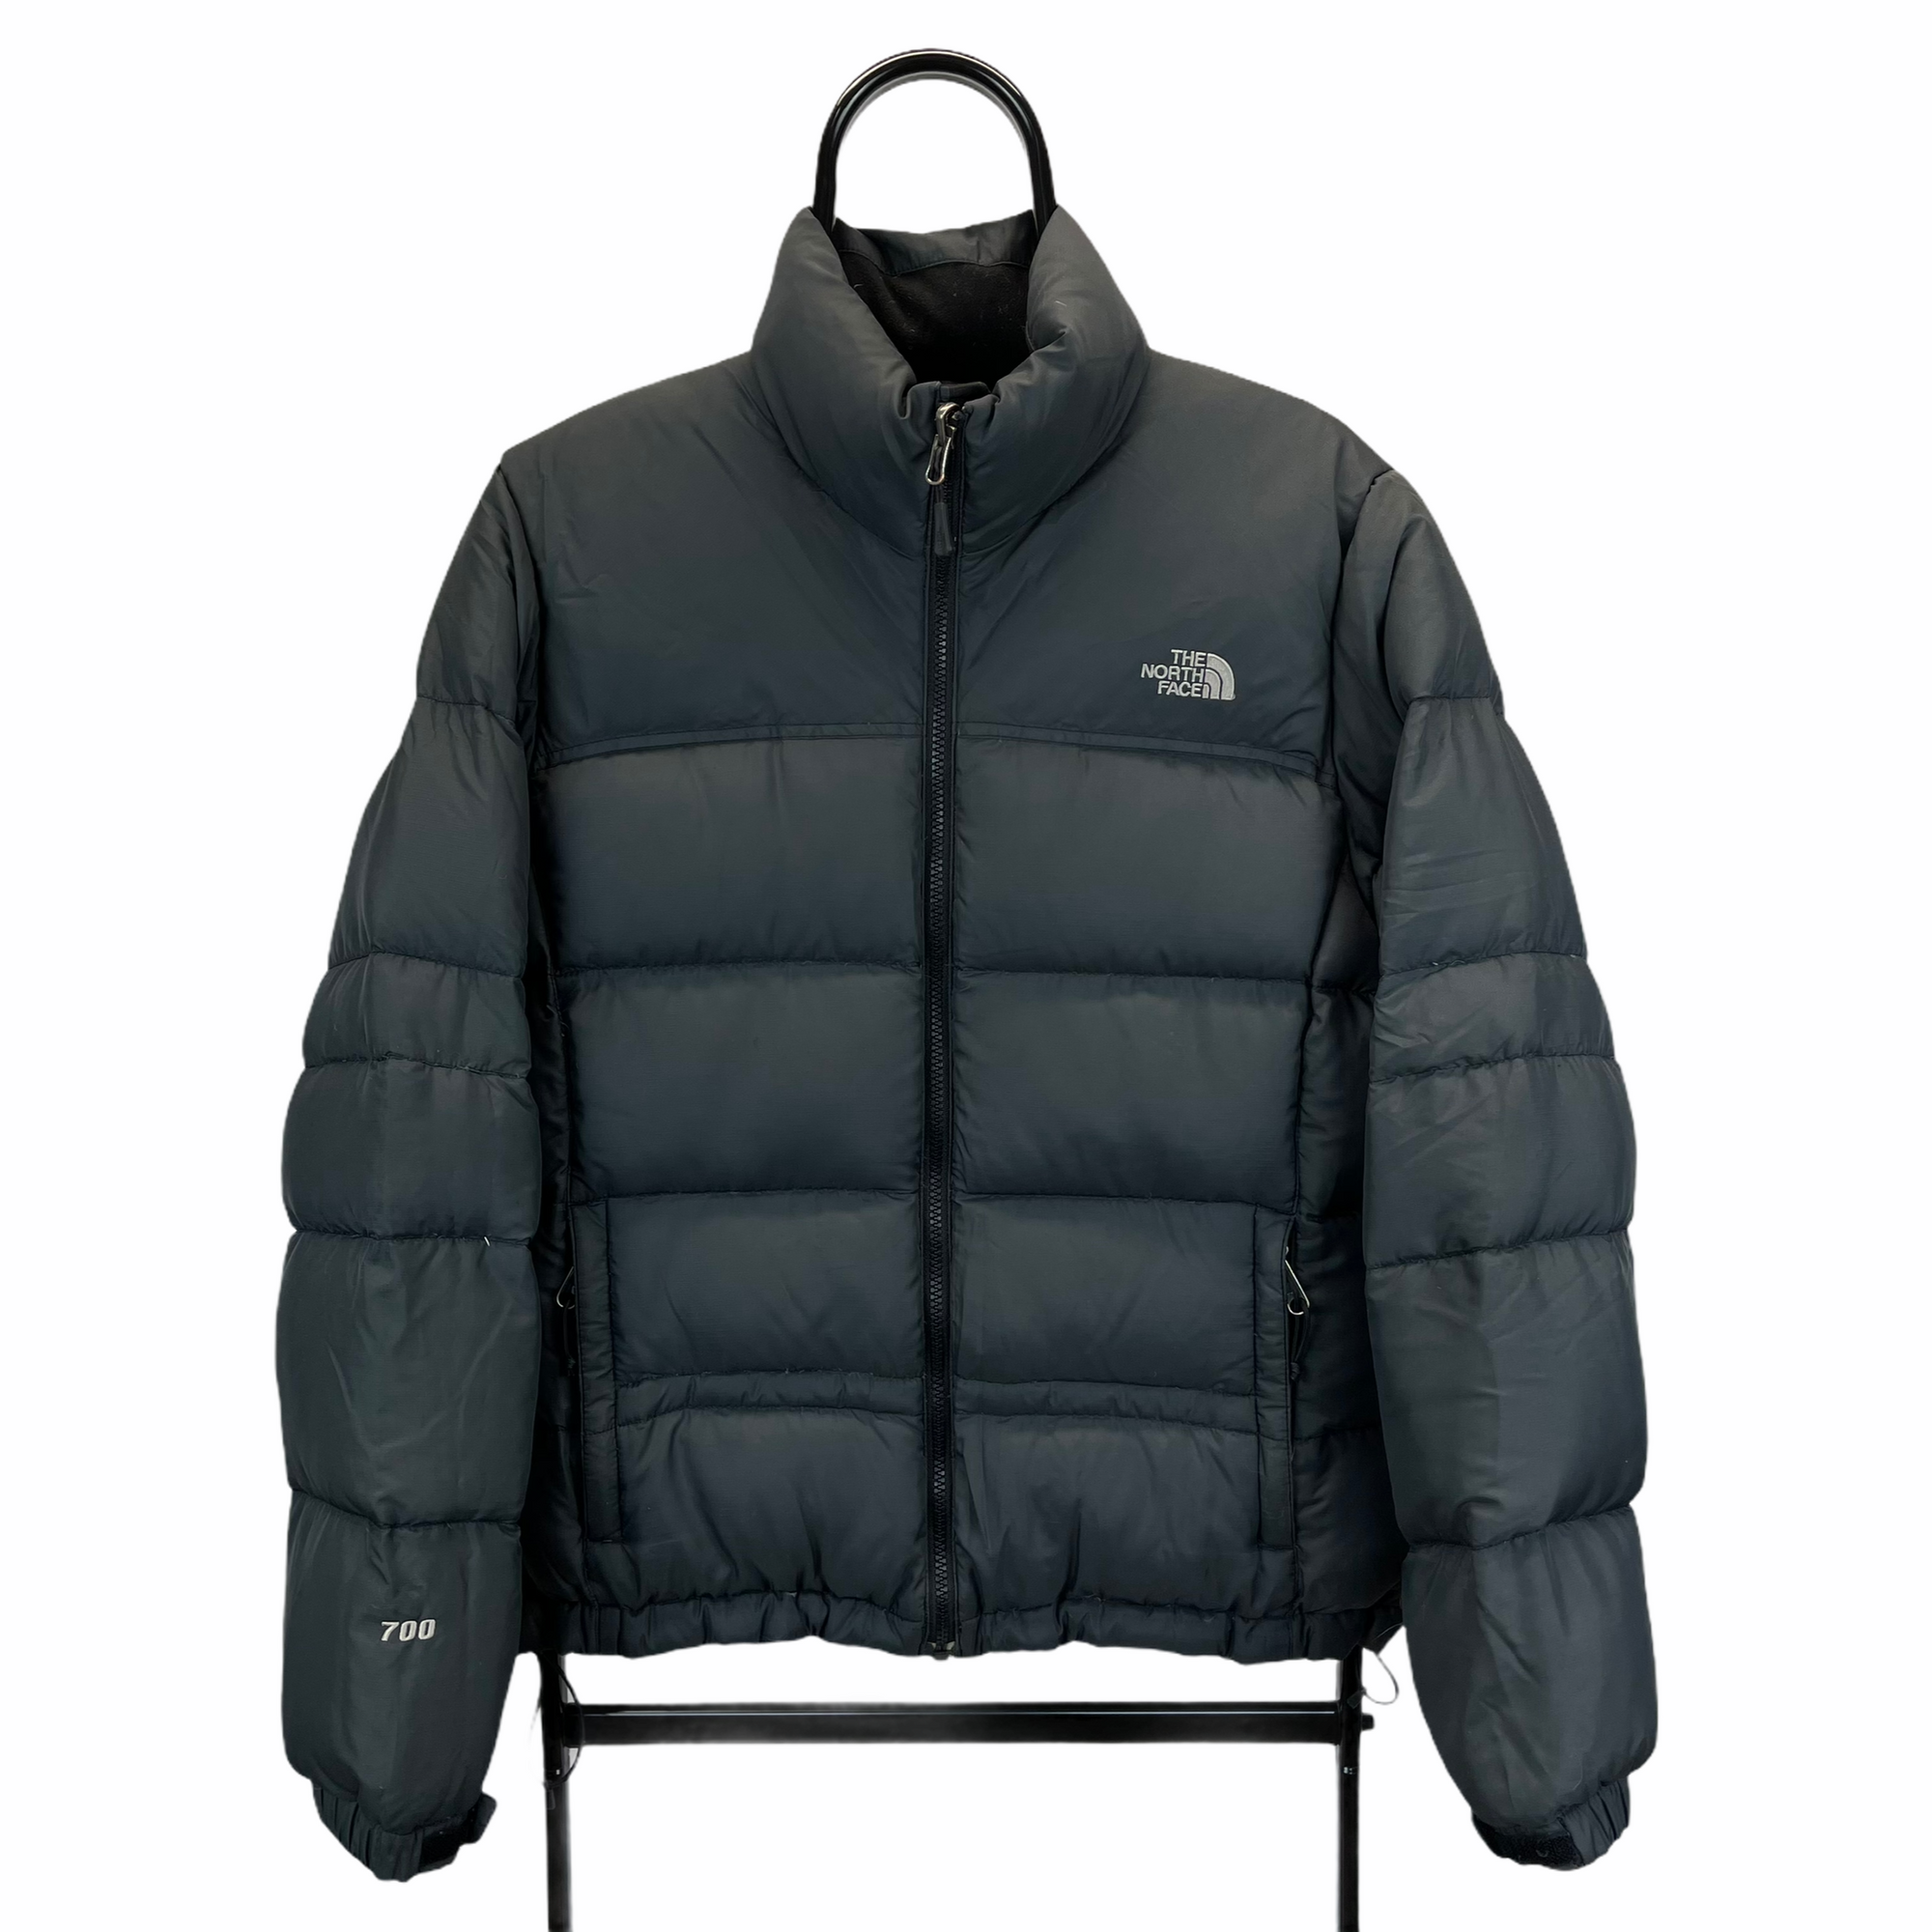 THE NORTH FACE NUPTSE 700 PUFFER JACKET IN BLACK/DARK GREY - MEN'S SMALL/WOMEN'S LARGE